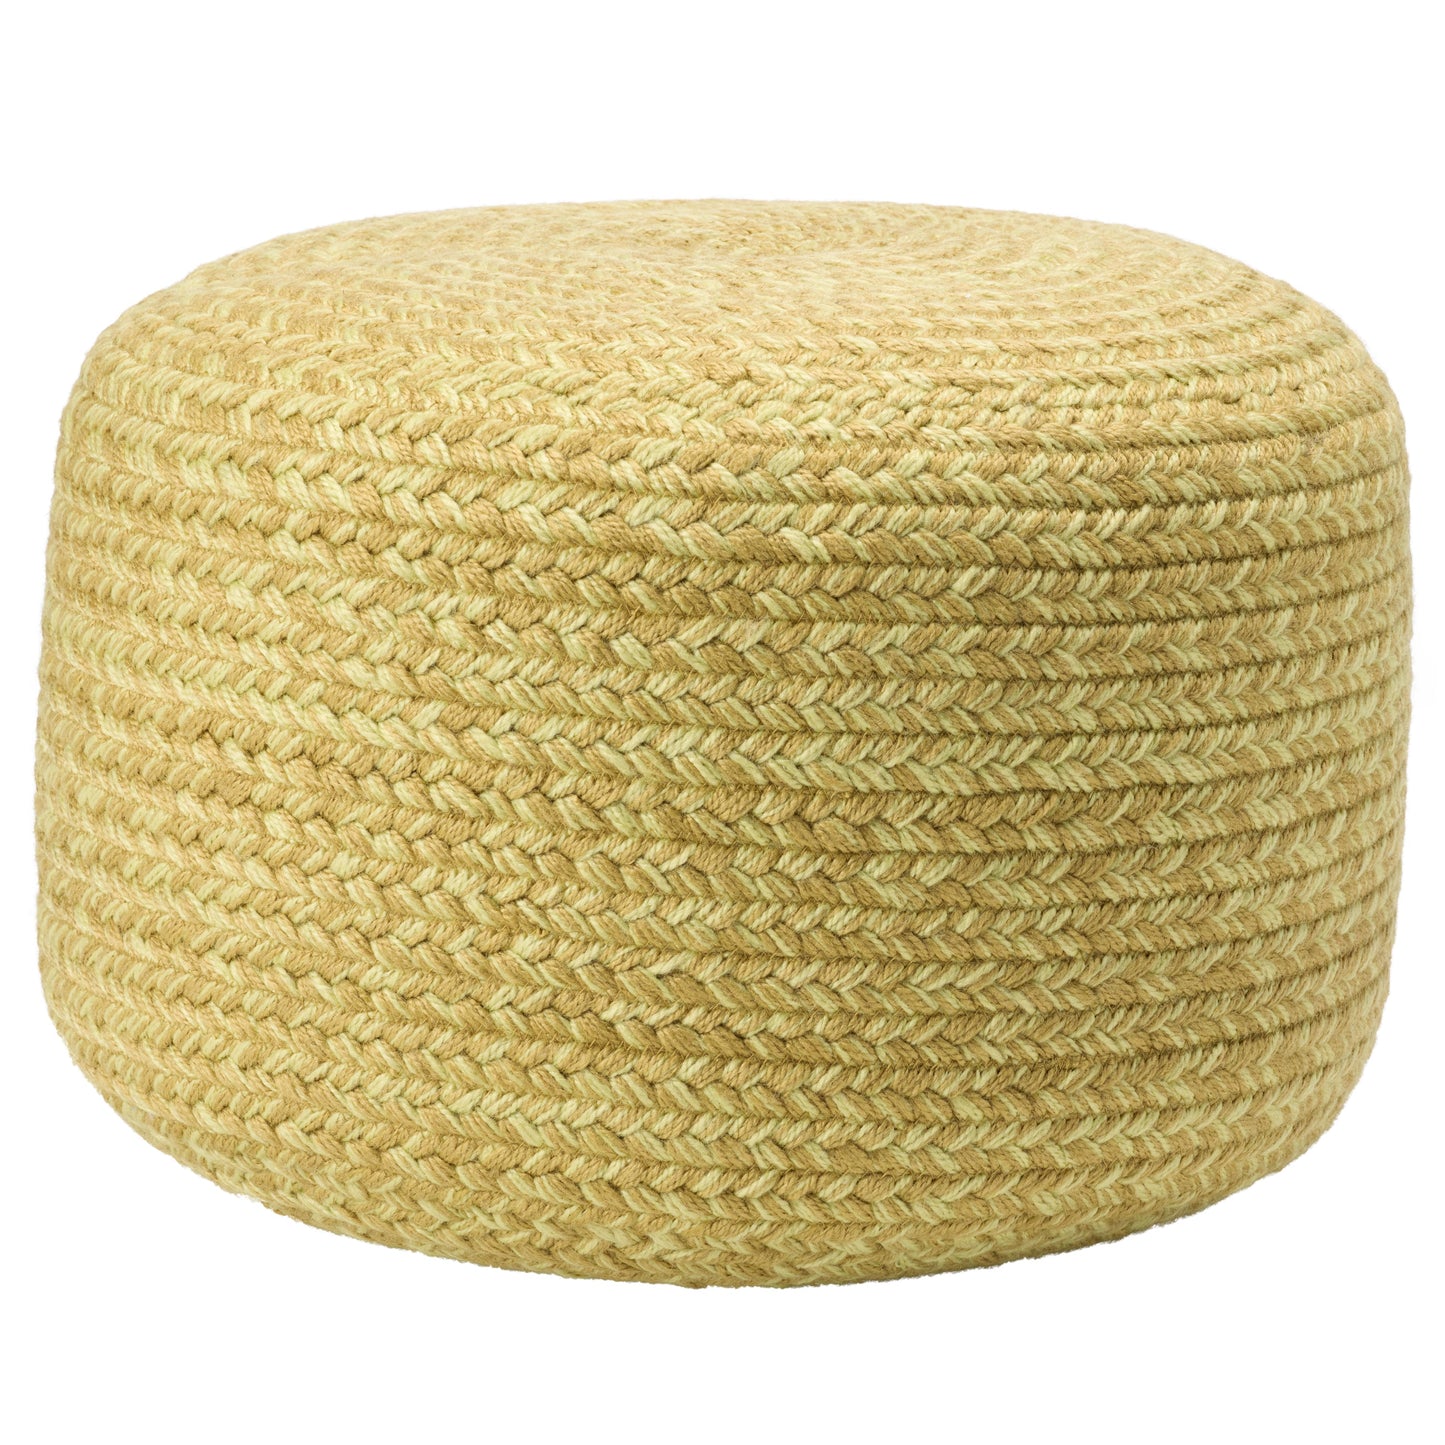 Saba Solar Grayton Handmade Synthetic Blend Outdoor Pouf From Vibe by Jaipur Living